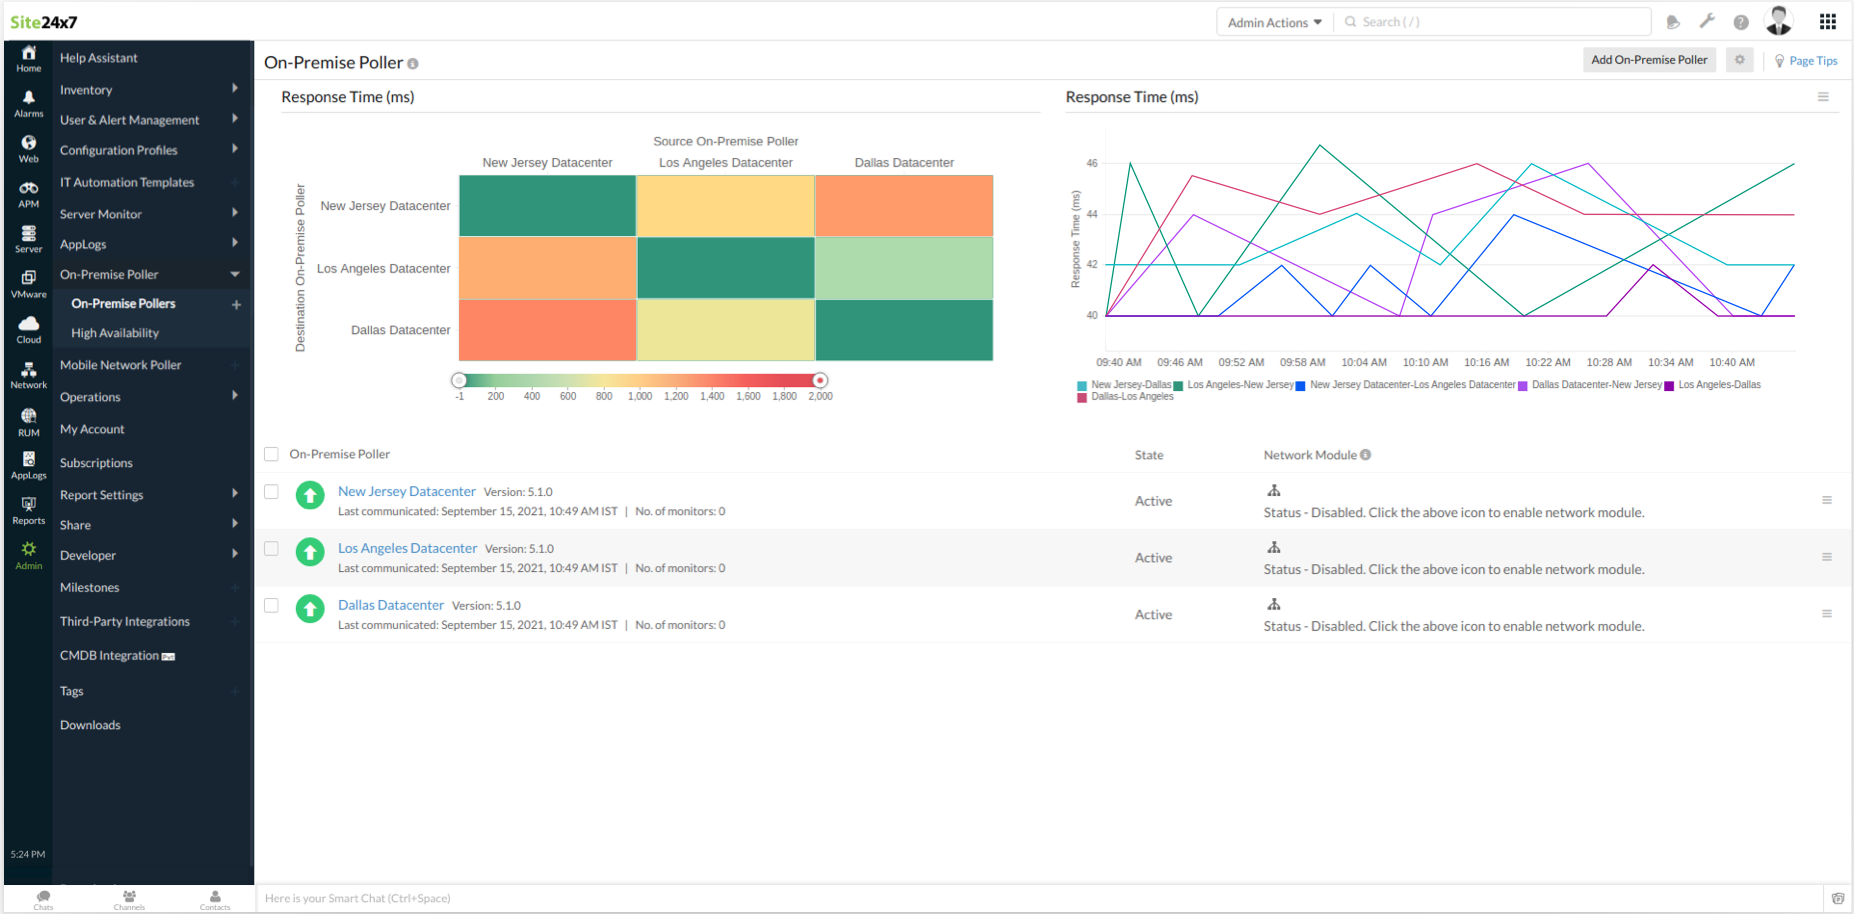 View latency dashboard to understand the latency between multiple On-Premise Pollers